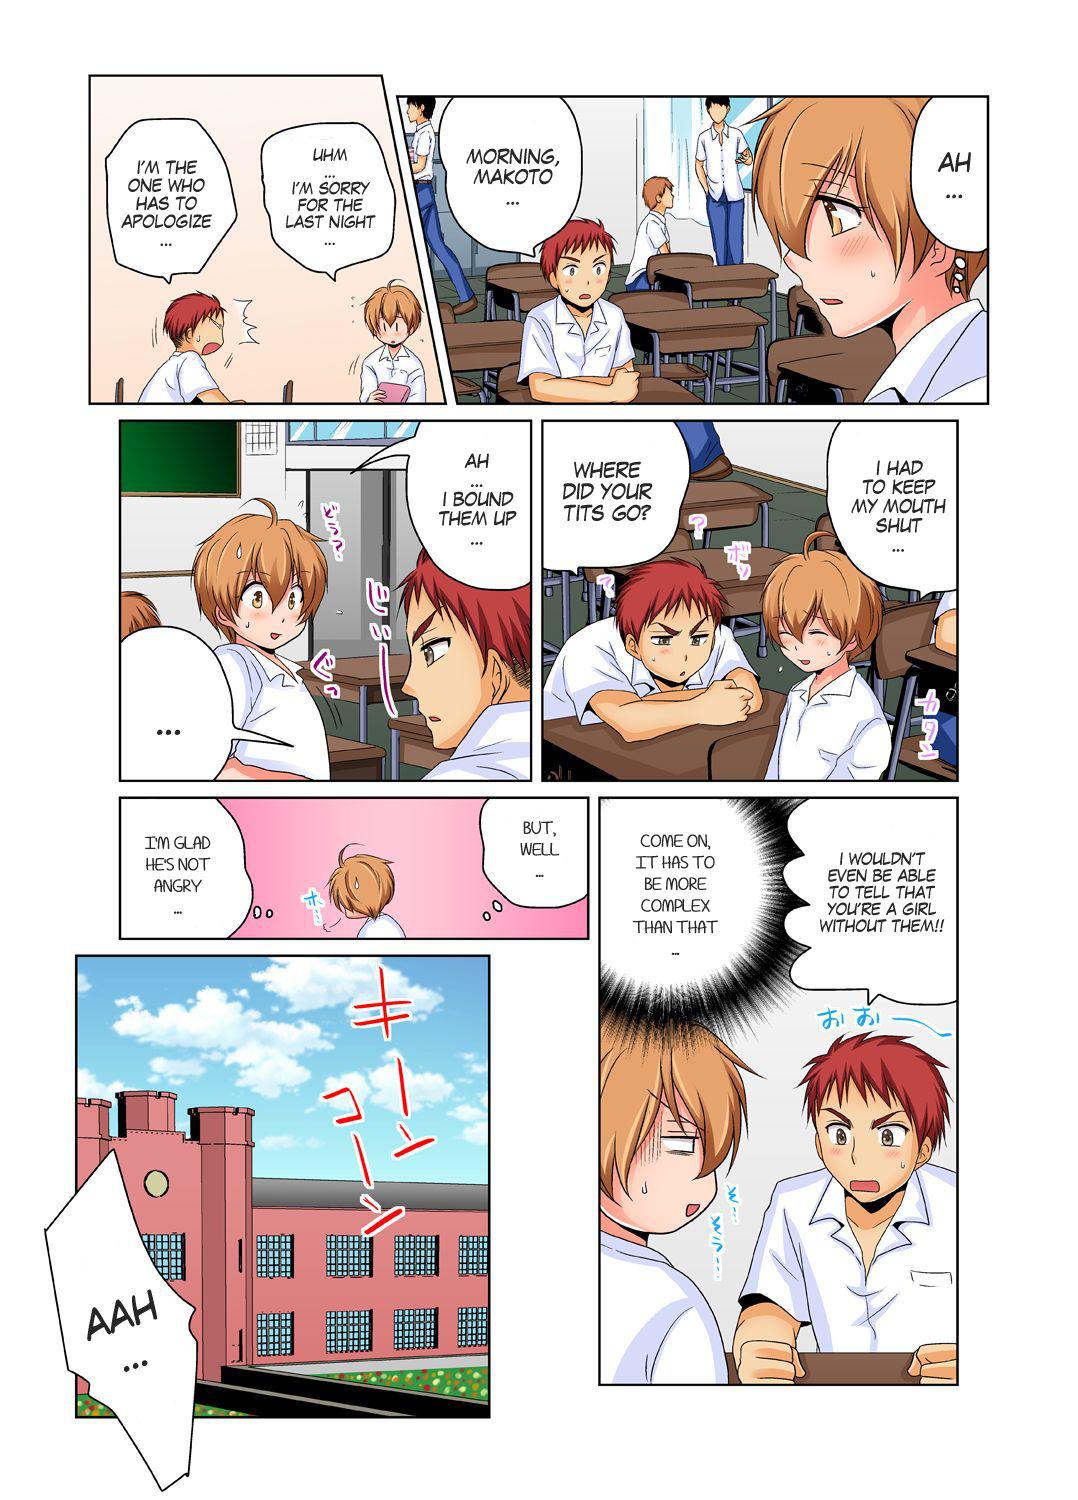 Innocent Nyotaika de Ecchi Kenshin!? Mirudake tte Itta no ni... 2 | Gender Bender Into Sexy Medical Examination! You said that you were only going to look... 2 Girls - Page 4